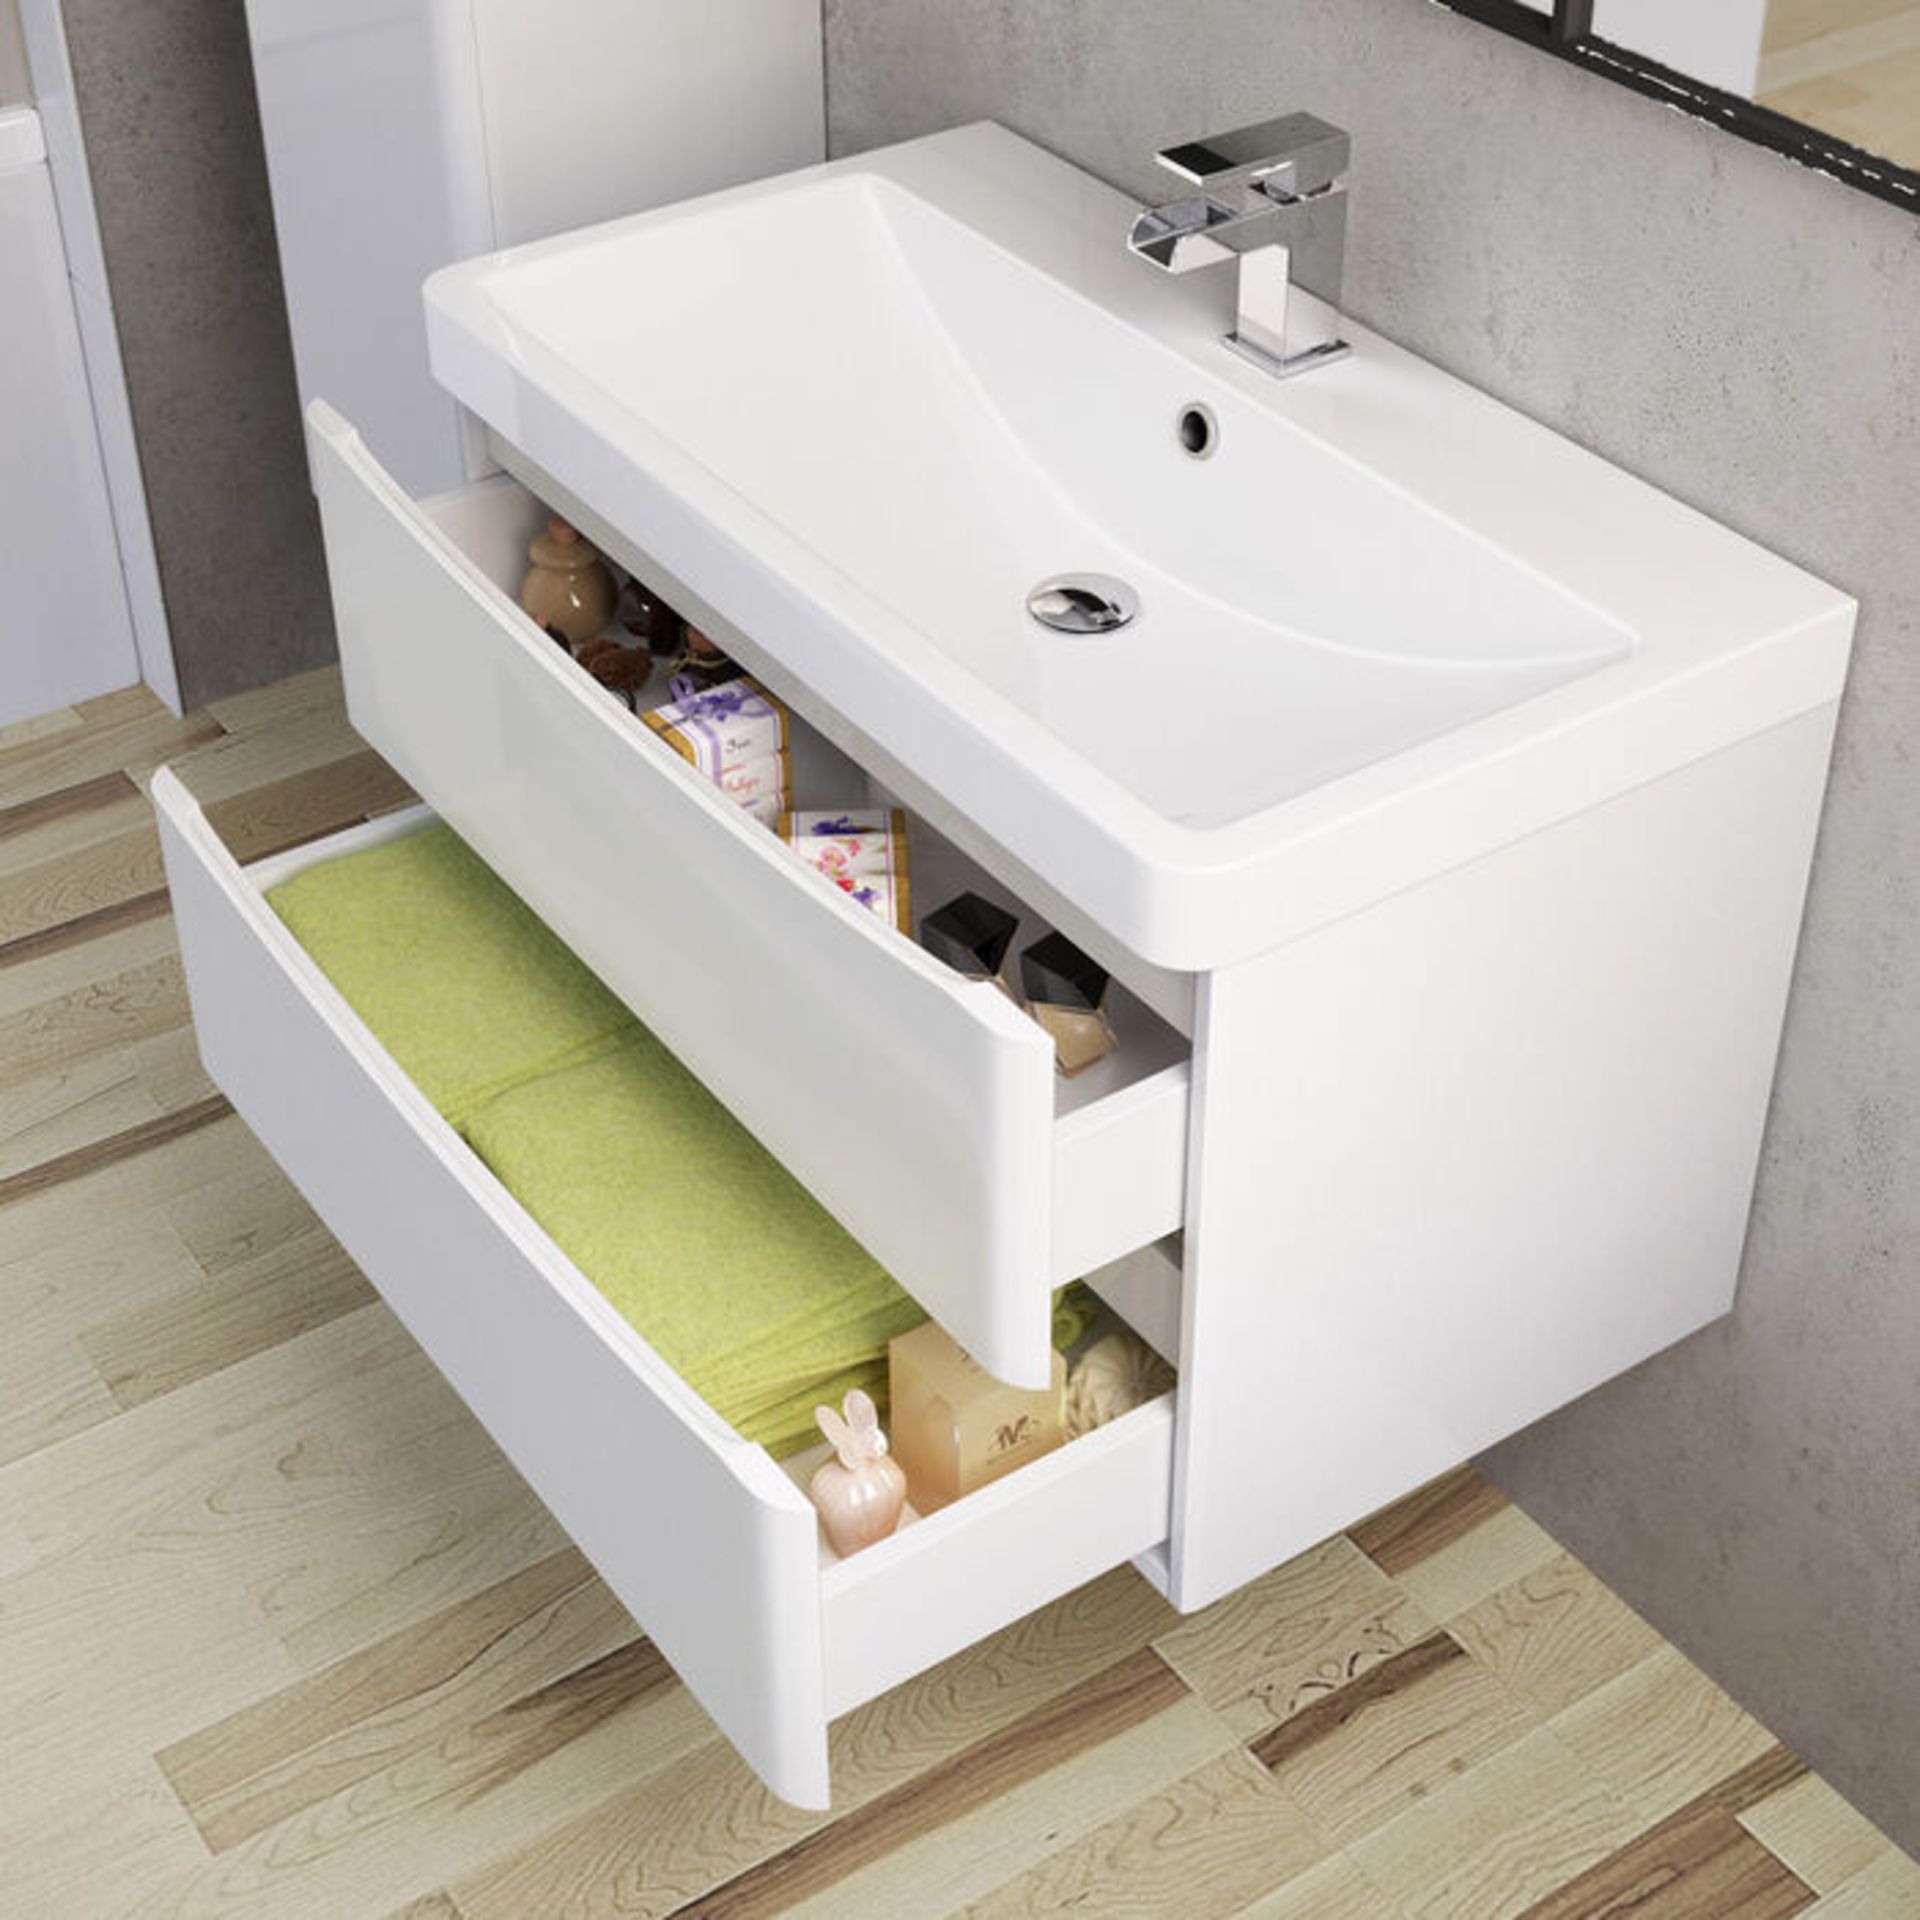 (QQ13) 800mm Austin II Gloss White Built In Sink Drawer Unit - Wall Hung. RRP £599.99. This st... - Image 2 of 4